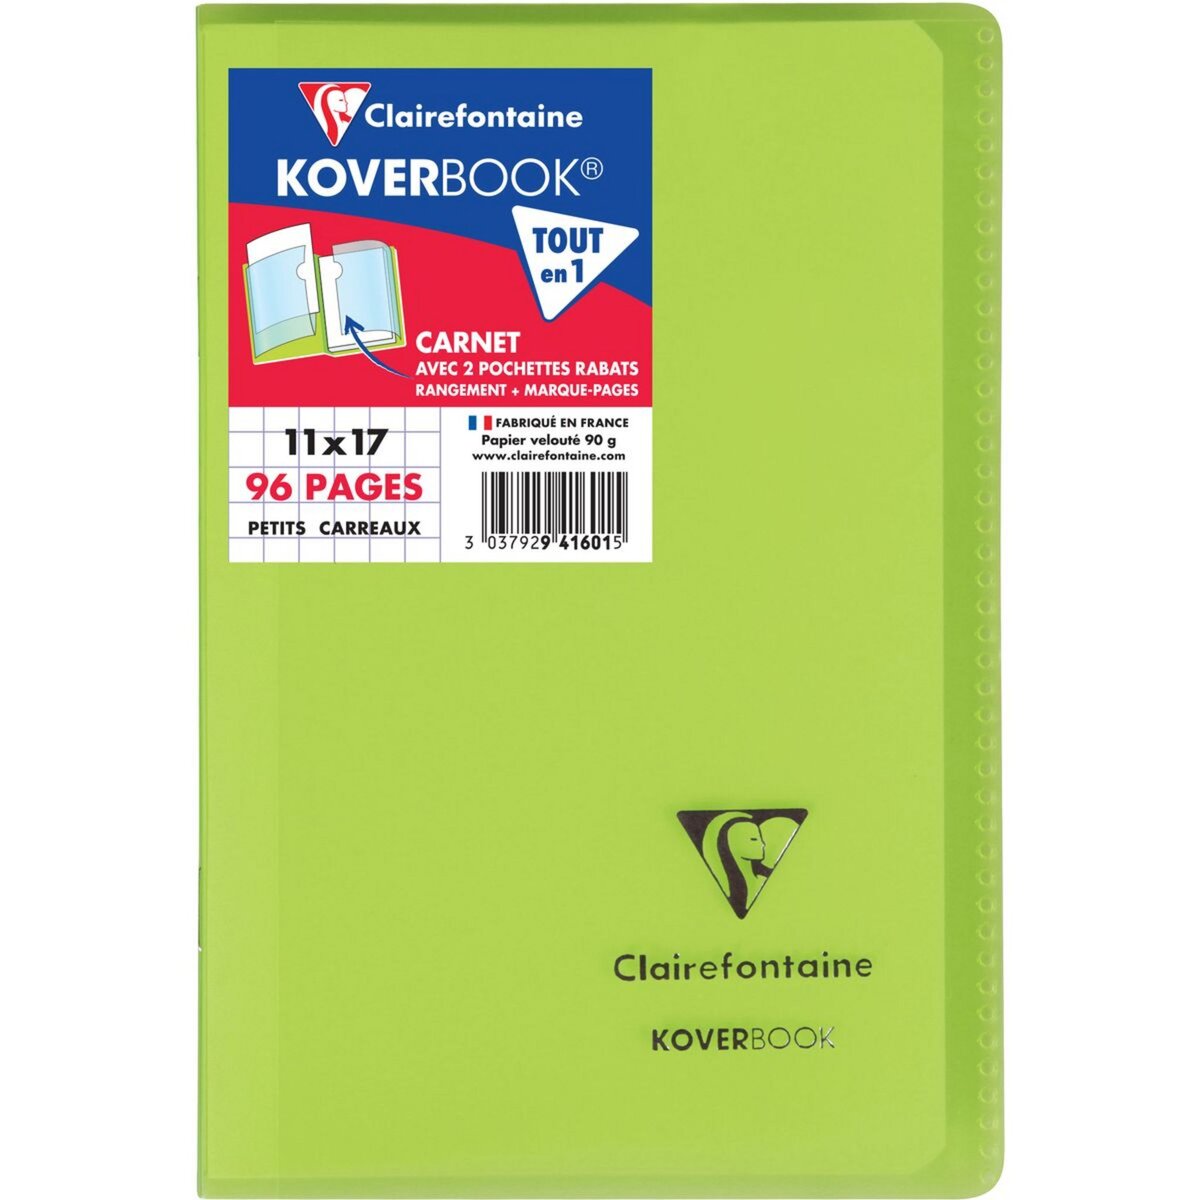 CLAIREFONTAINE Carnet piqûre petits carreaux Kover Book 110x170 96 pages Clairefontaine - Vert